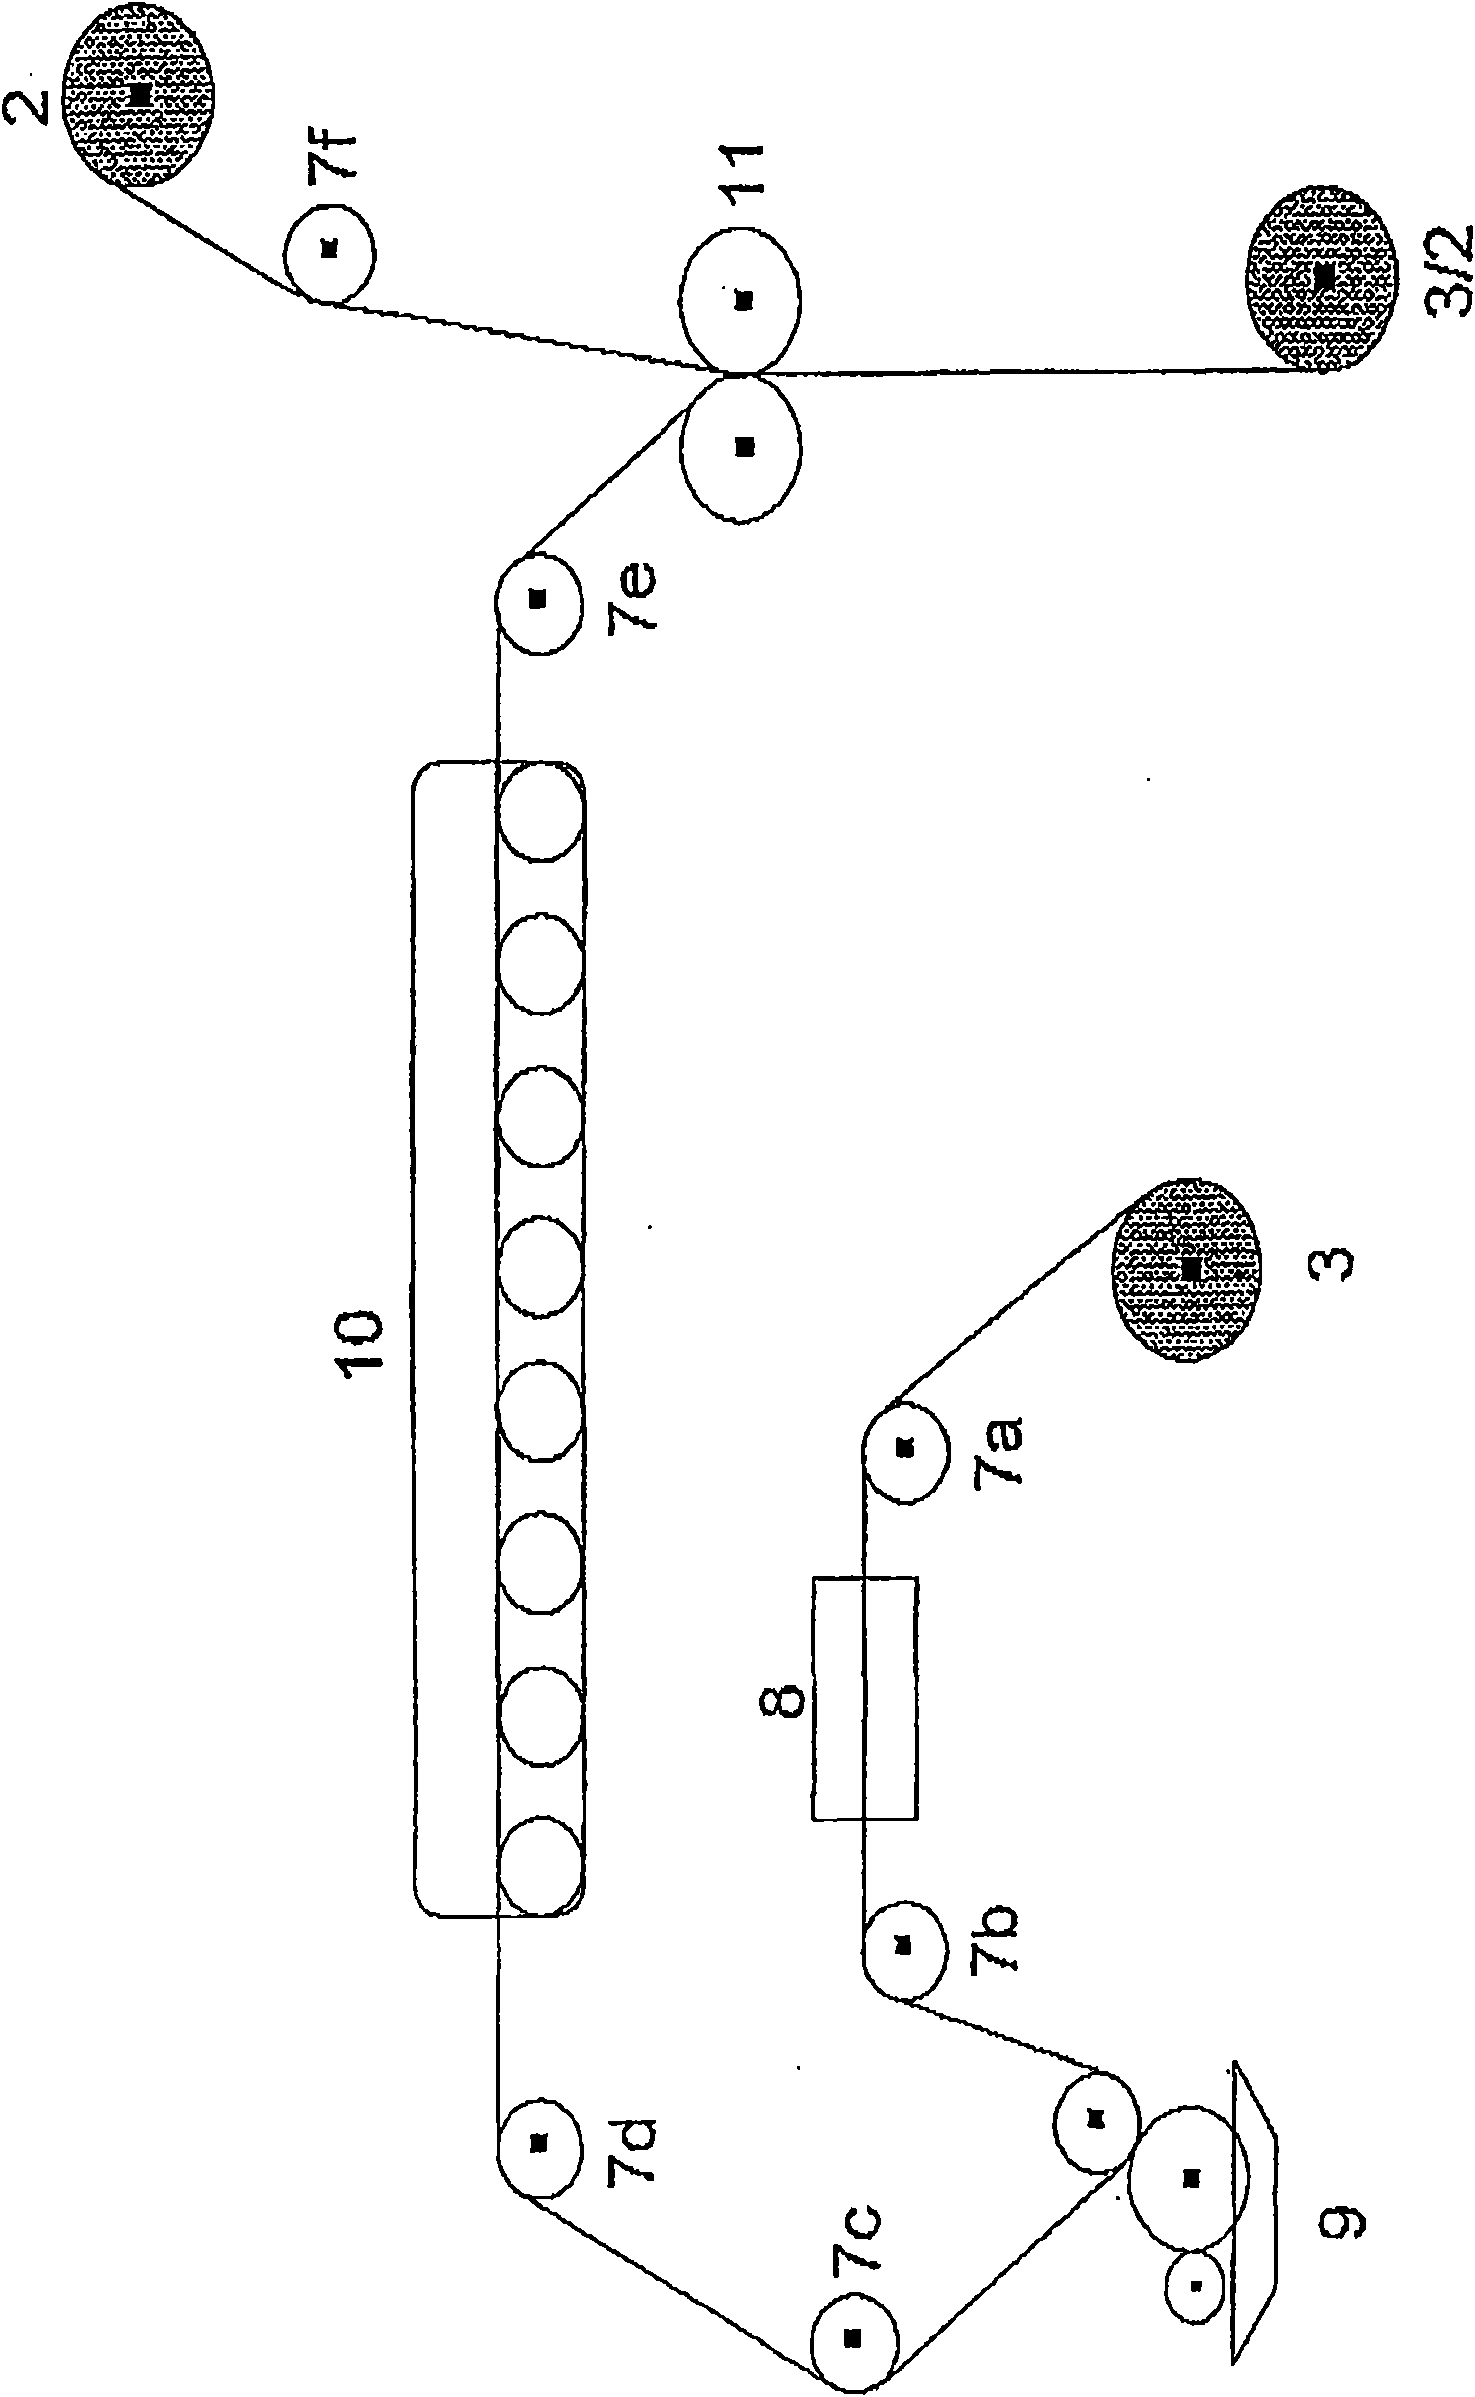 Use of a polymer composite for the production of photovoltaic modules